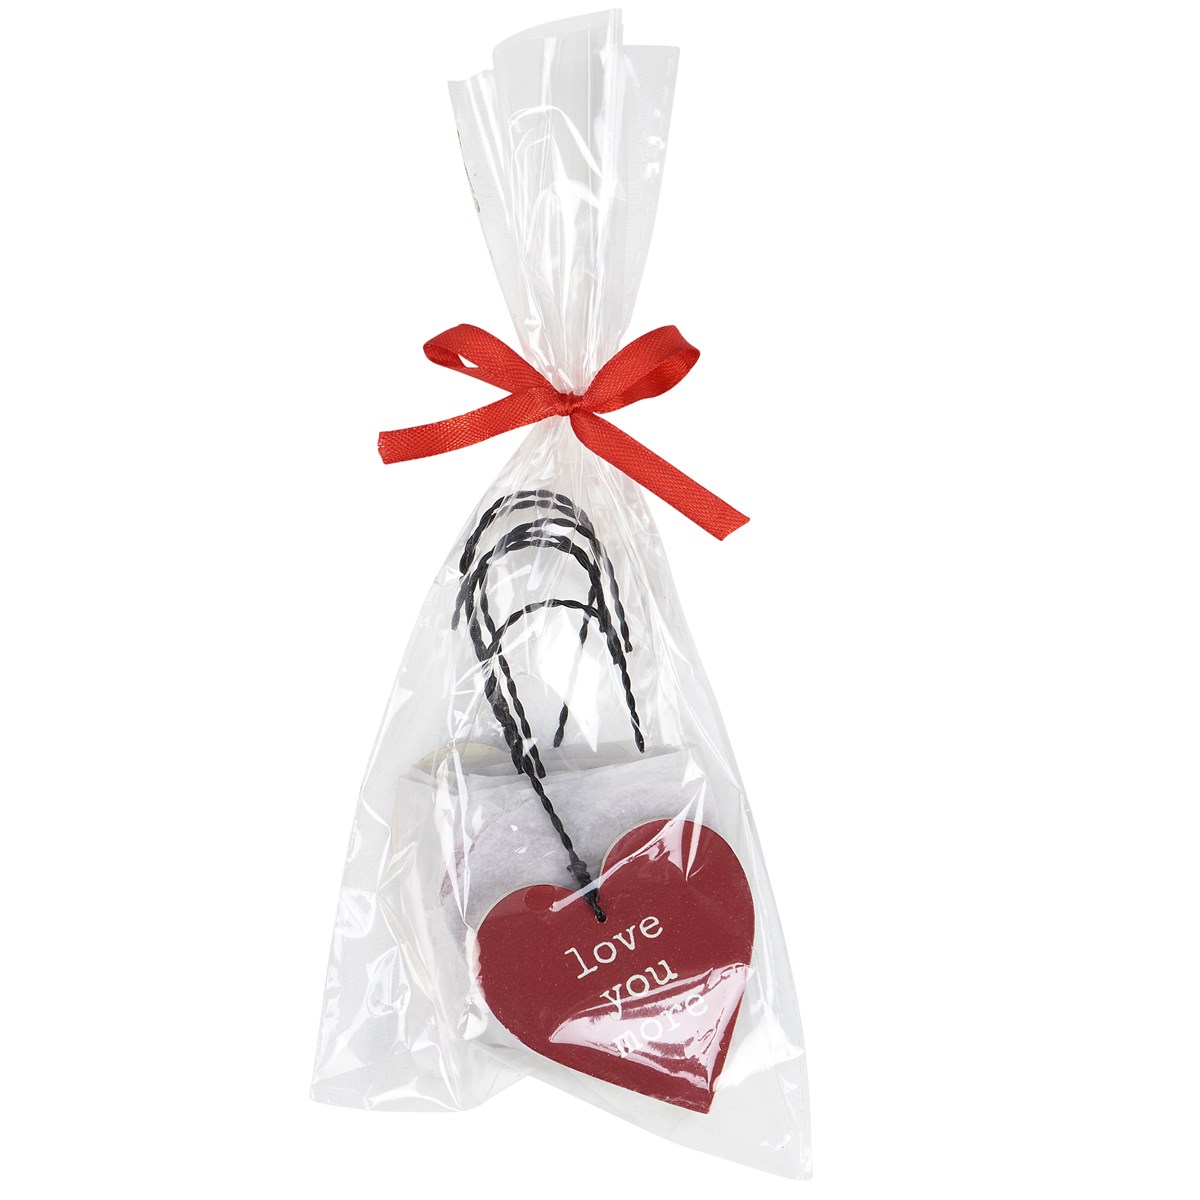 Love You More Ornament Set - Wood, Wire